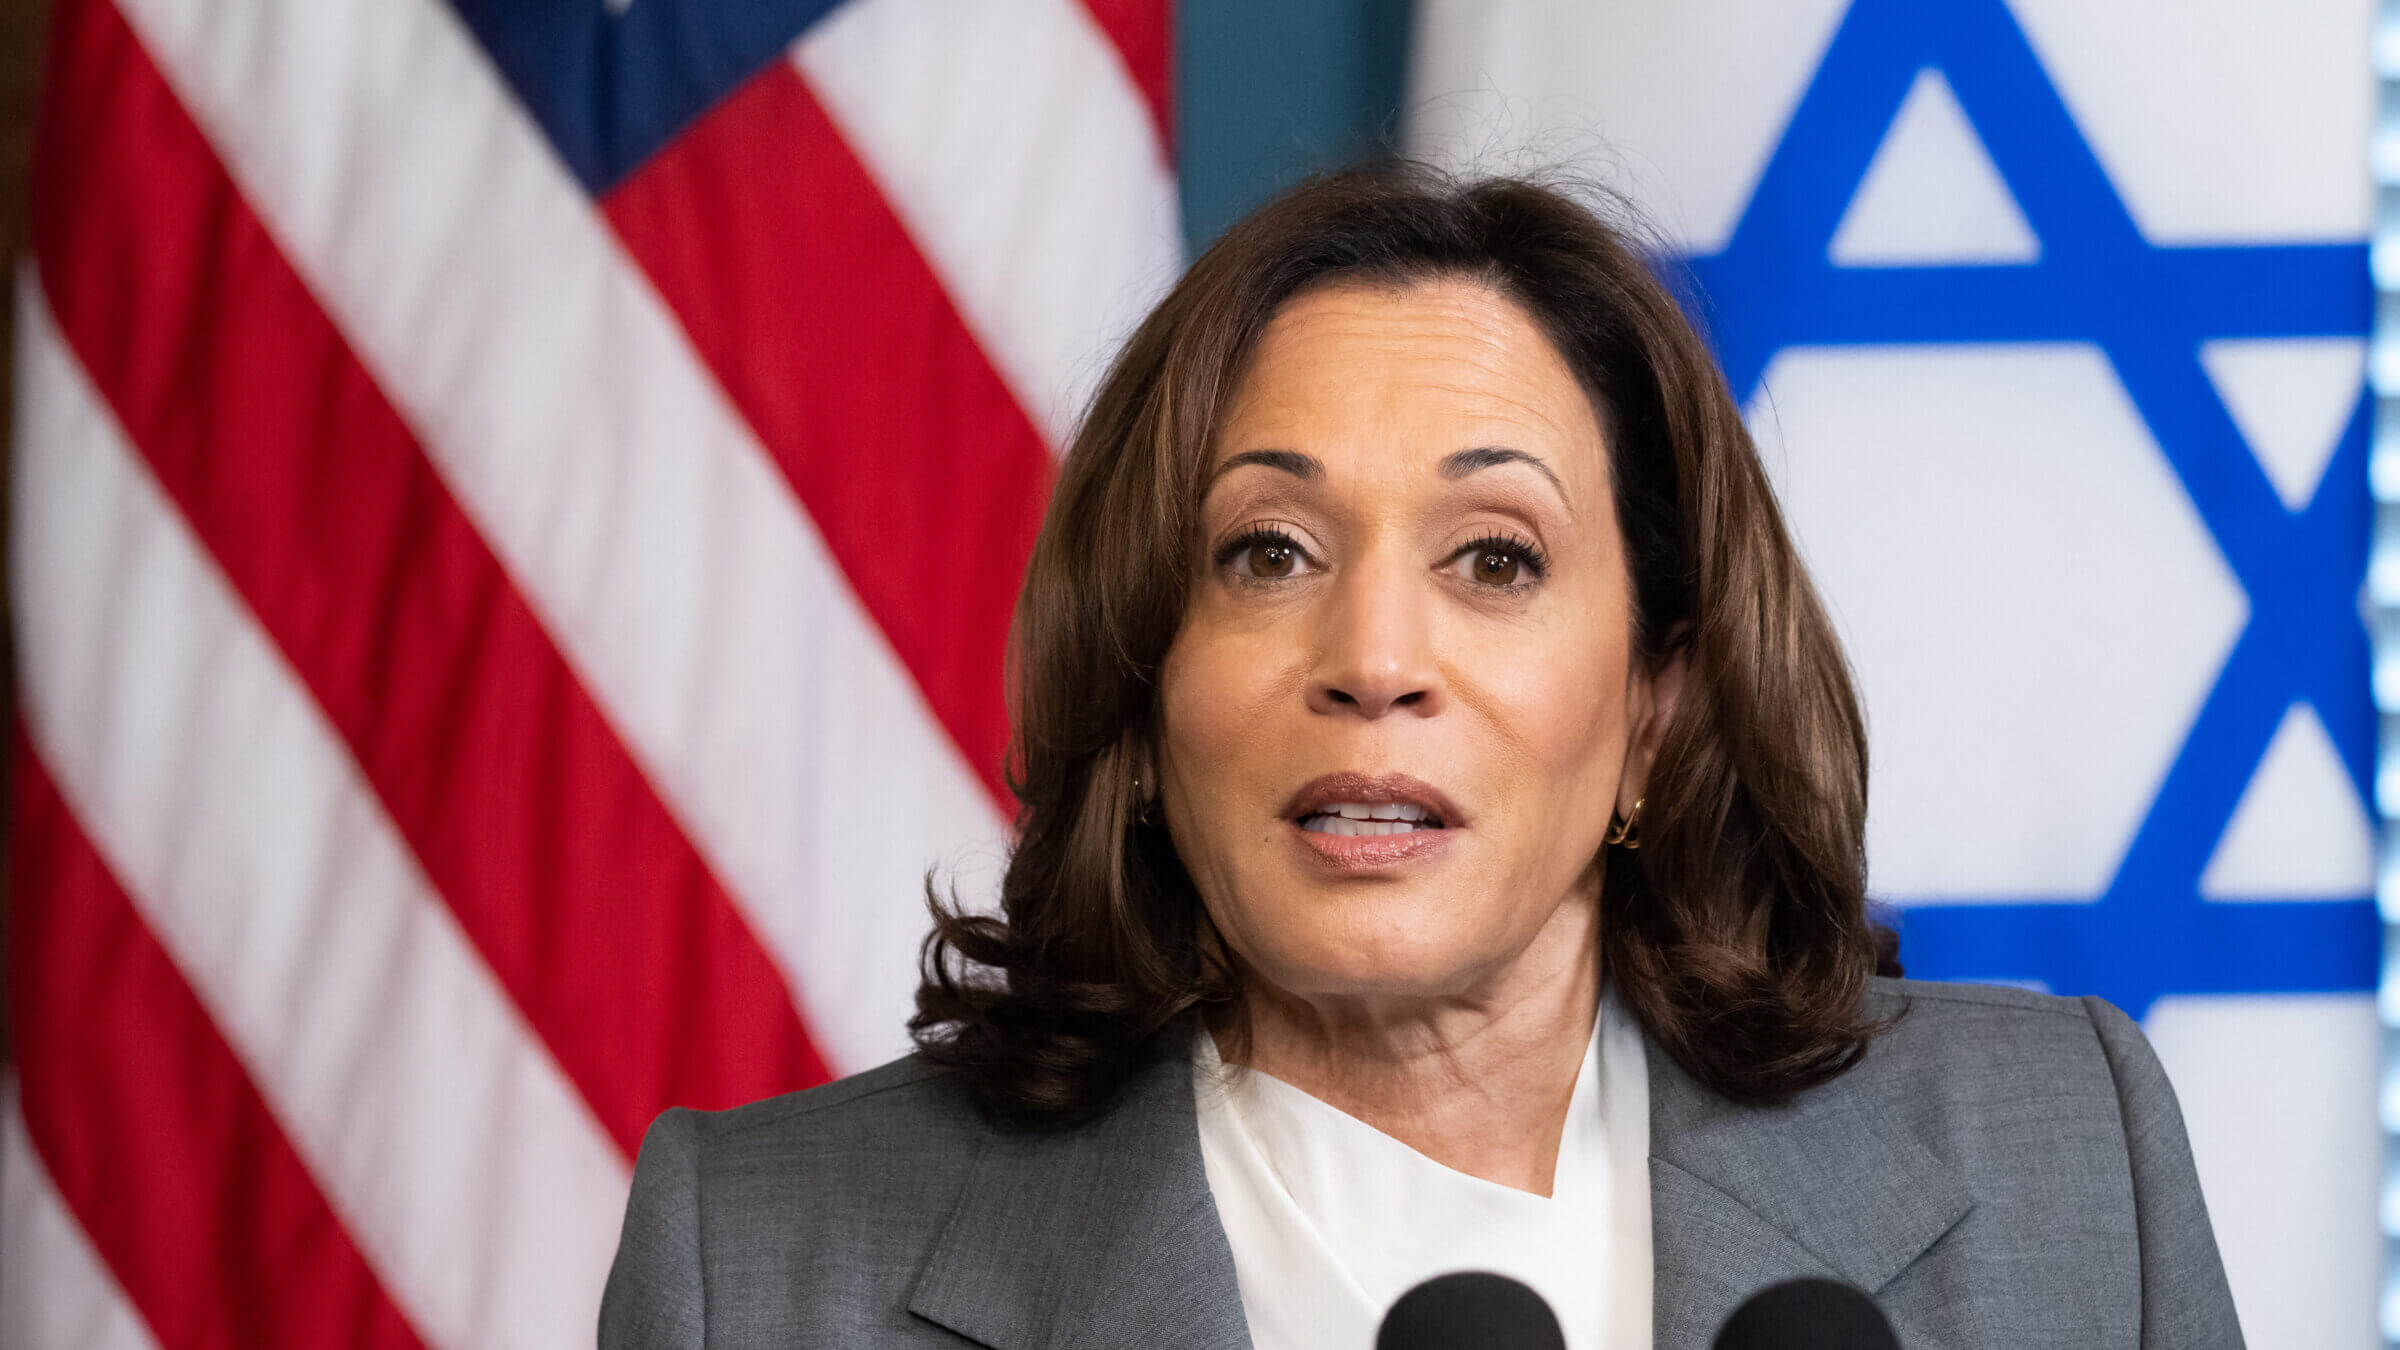 US Vice President Kamala Harris and Israeli President Isaac Herzog (out of frame) speak to the media prior to a meeting at the Eisenhower Executive Office Building in Washington, DC, July 19, 2023. (Photo by SAUL LOEB / AFP) (Photo by SAUL LOEB/AFP via Getty Images)